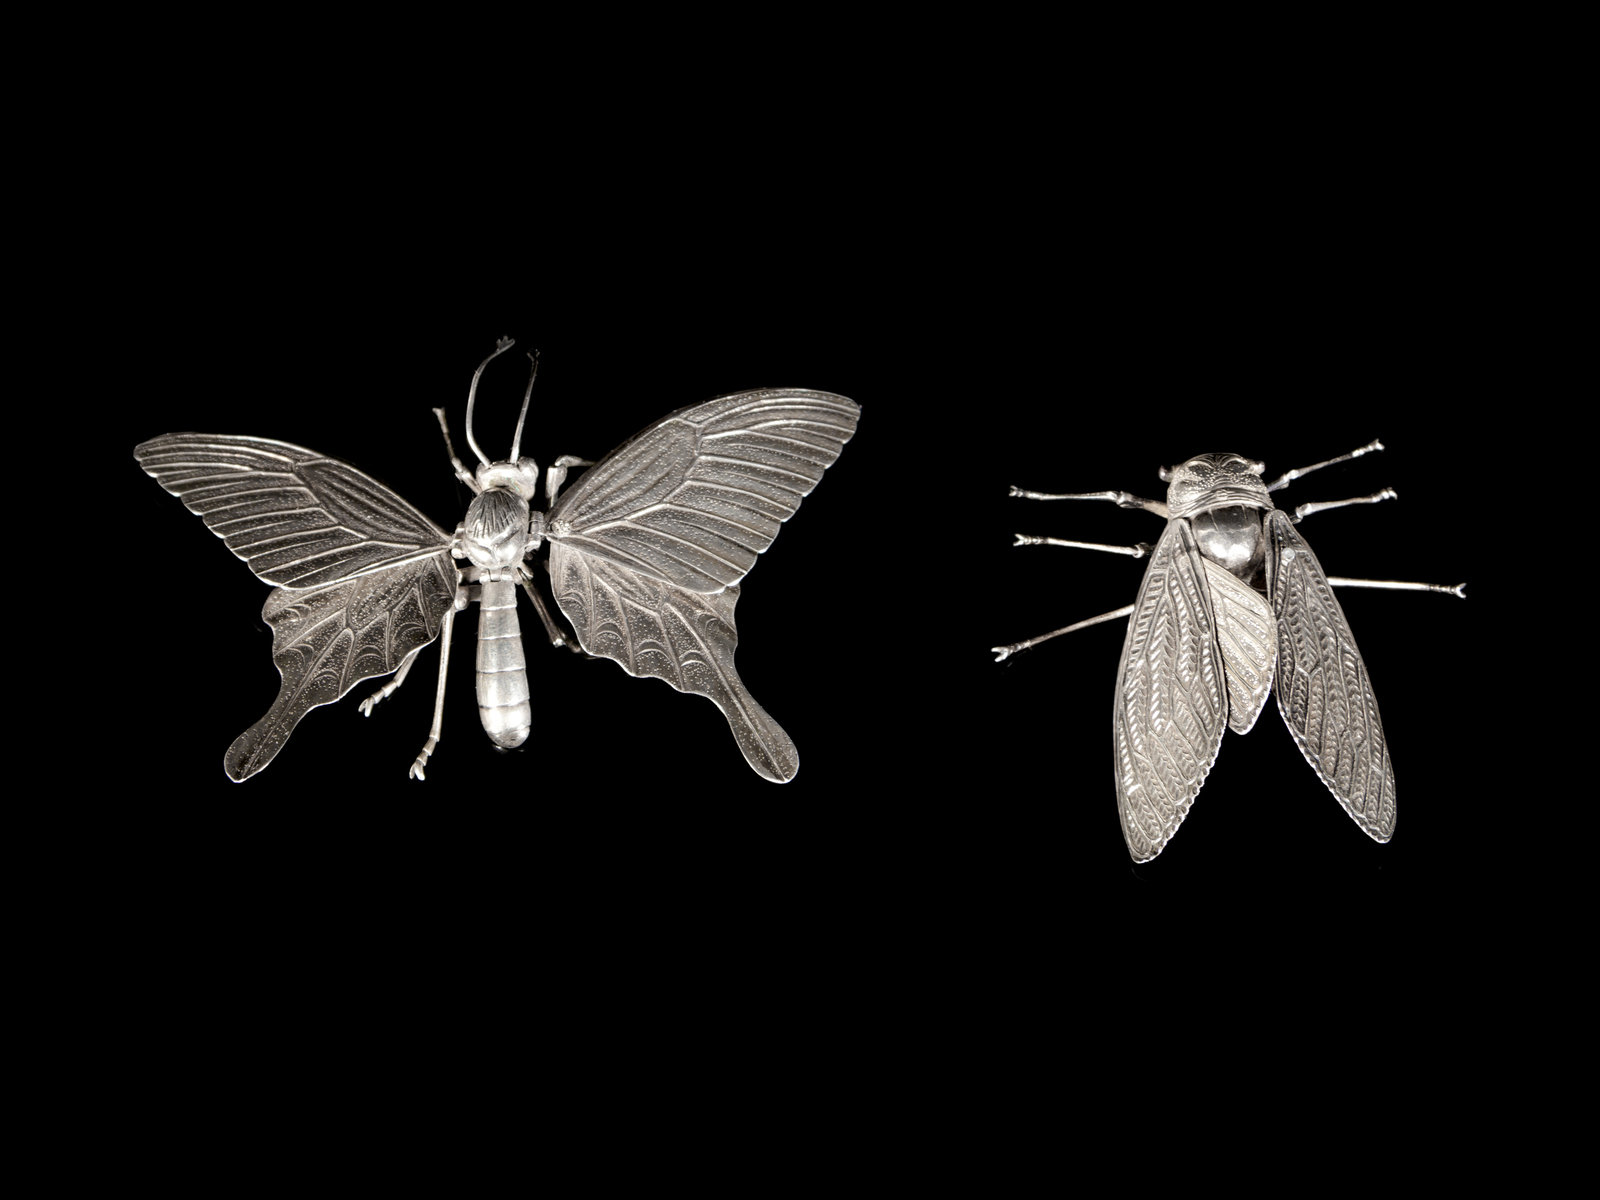 Two Silver Articulated Models of Insects